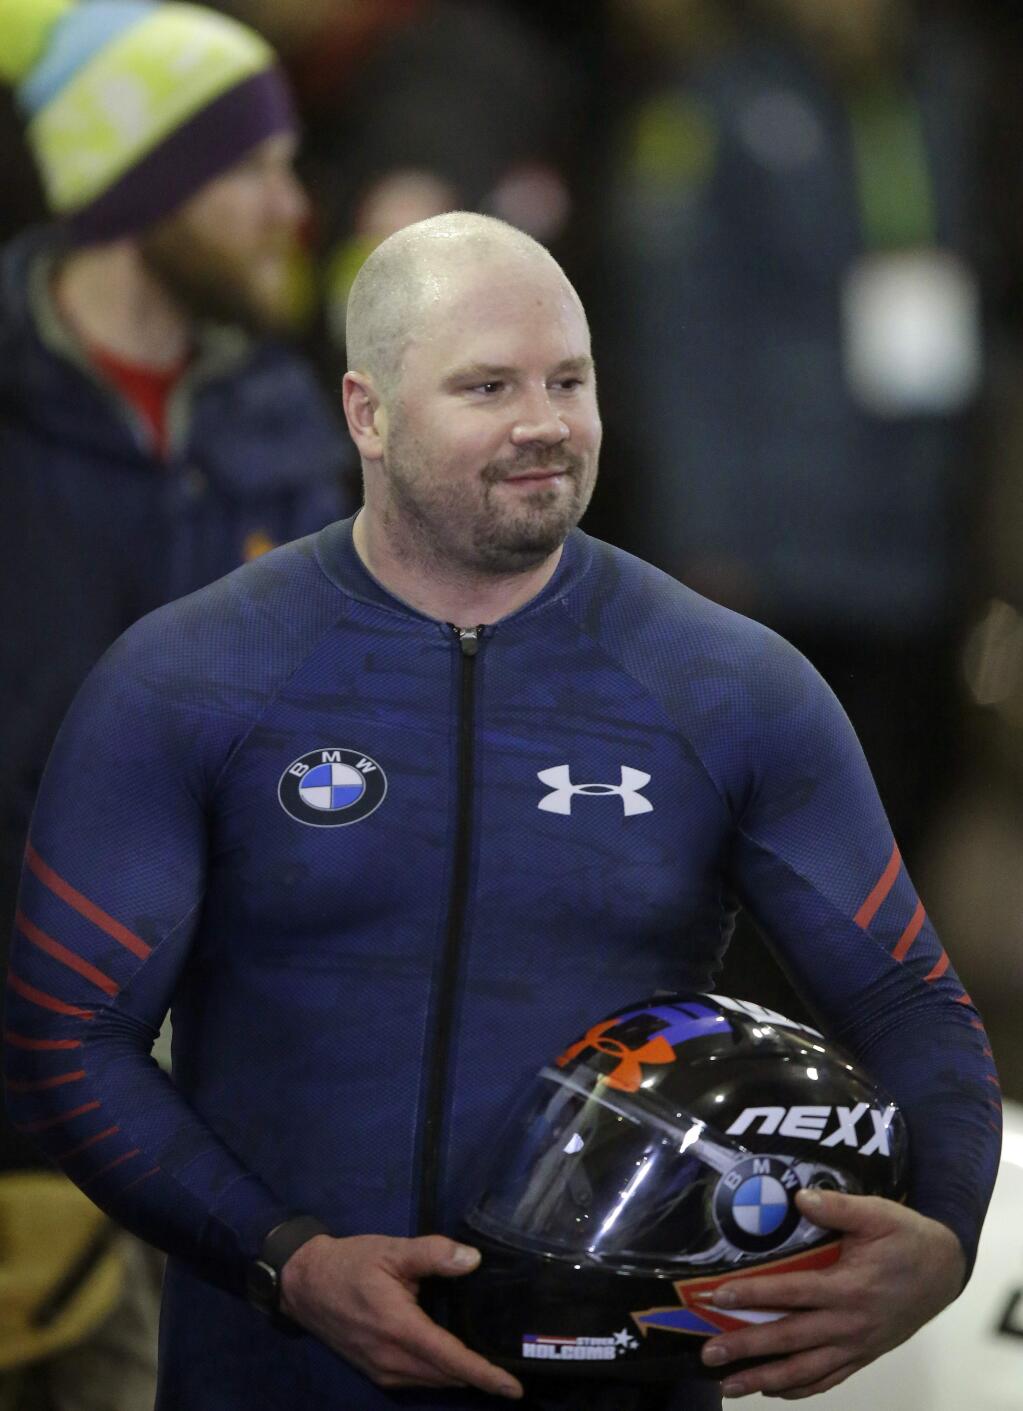 United States driver Steven Holcomb looks on after competing in a four-man bobsled World Cup race Saturday, Jan. 16, 2016, in Park City, Utah. (AP Photo/Rick Bowmer)